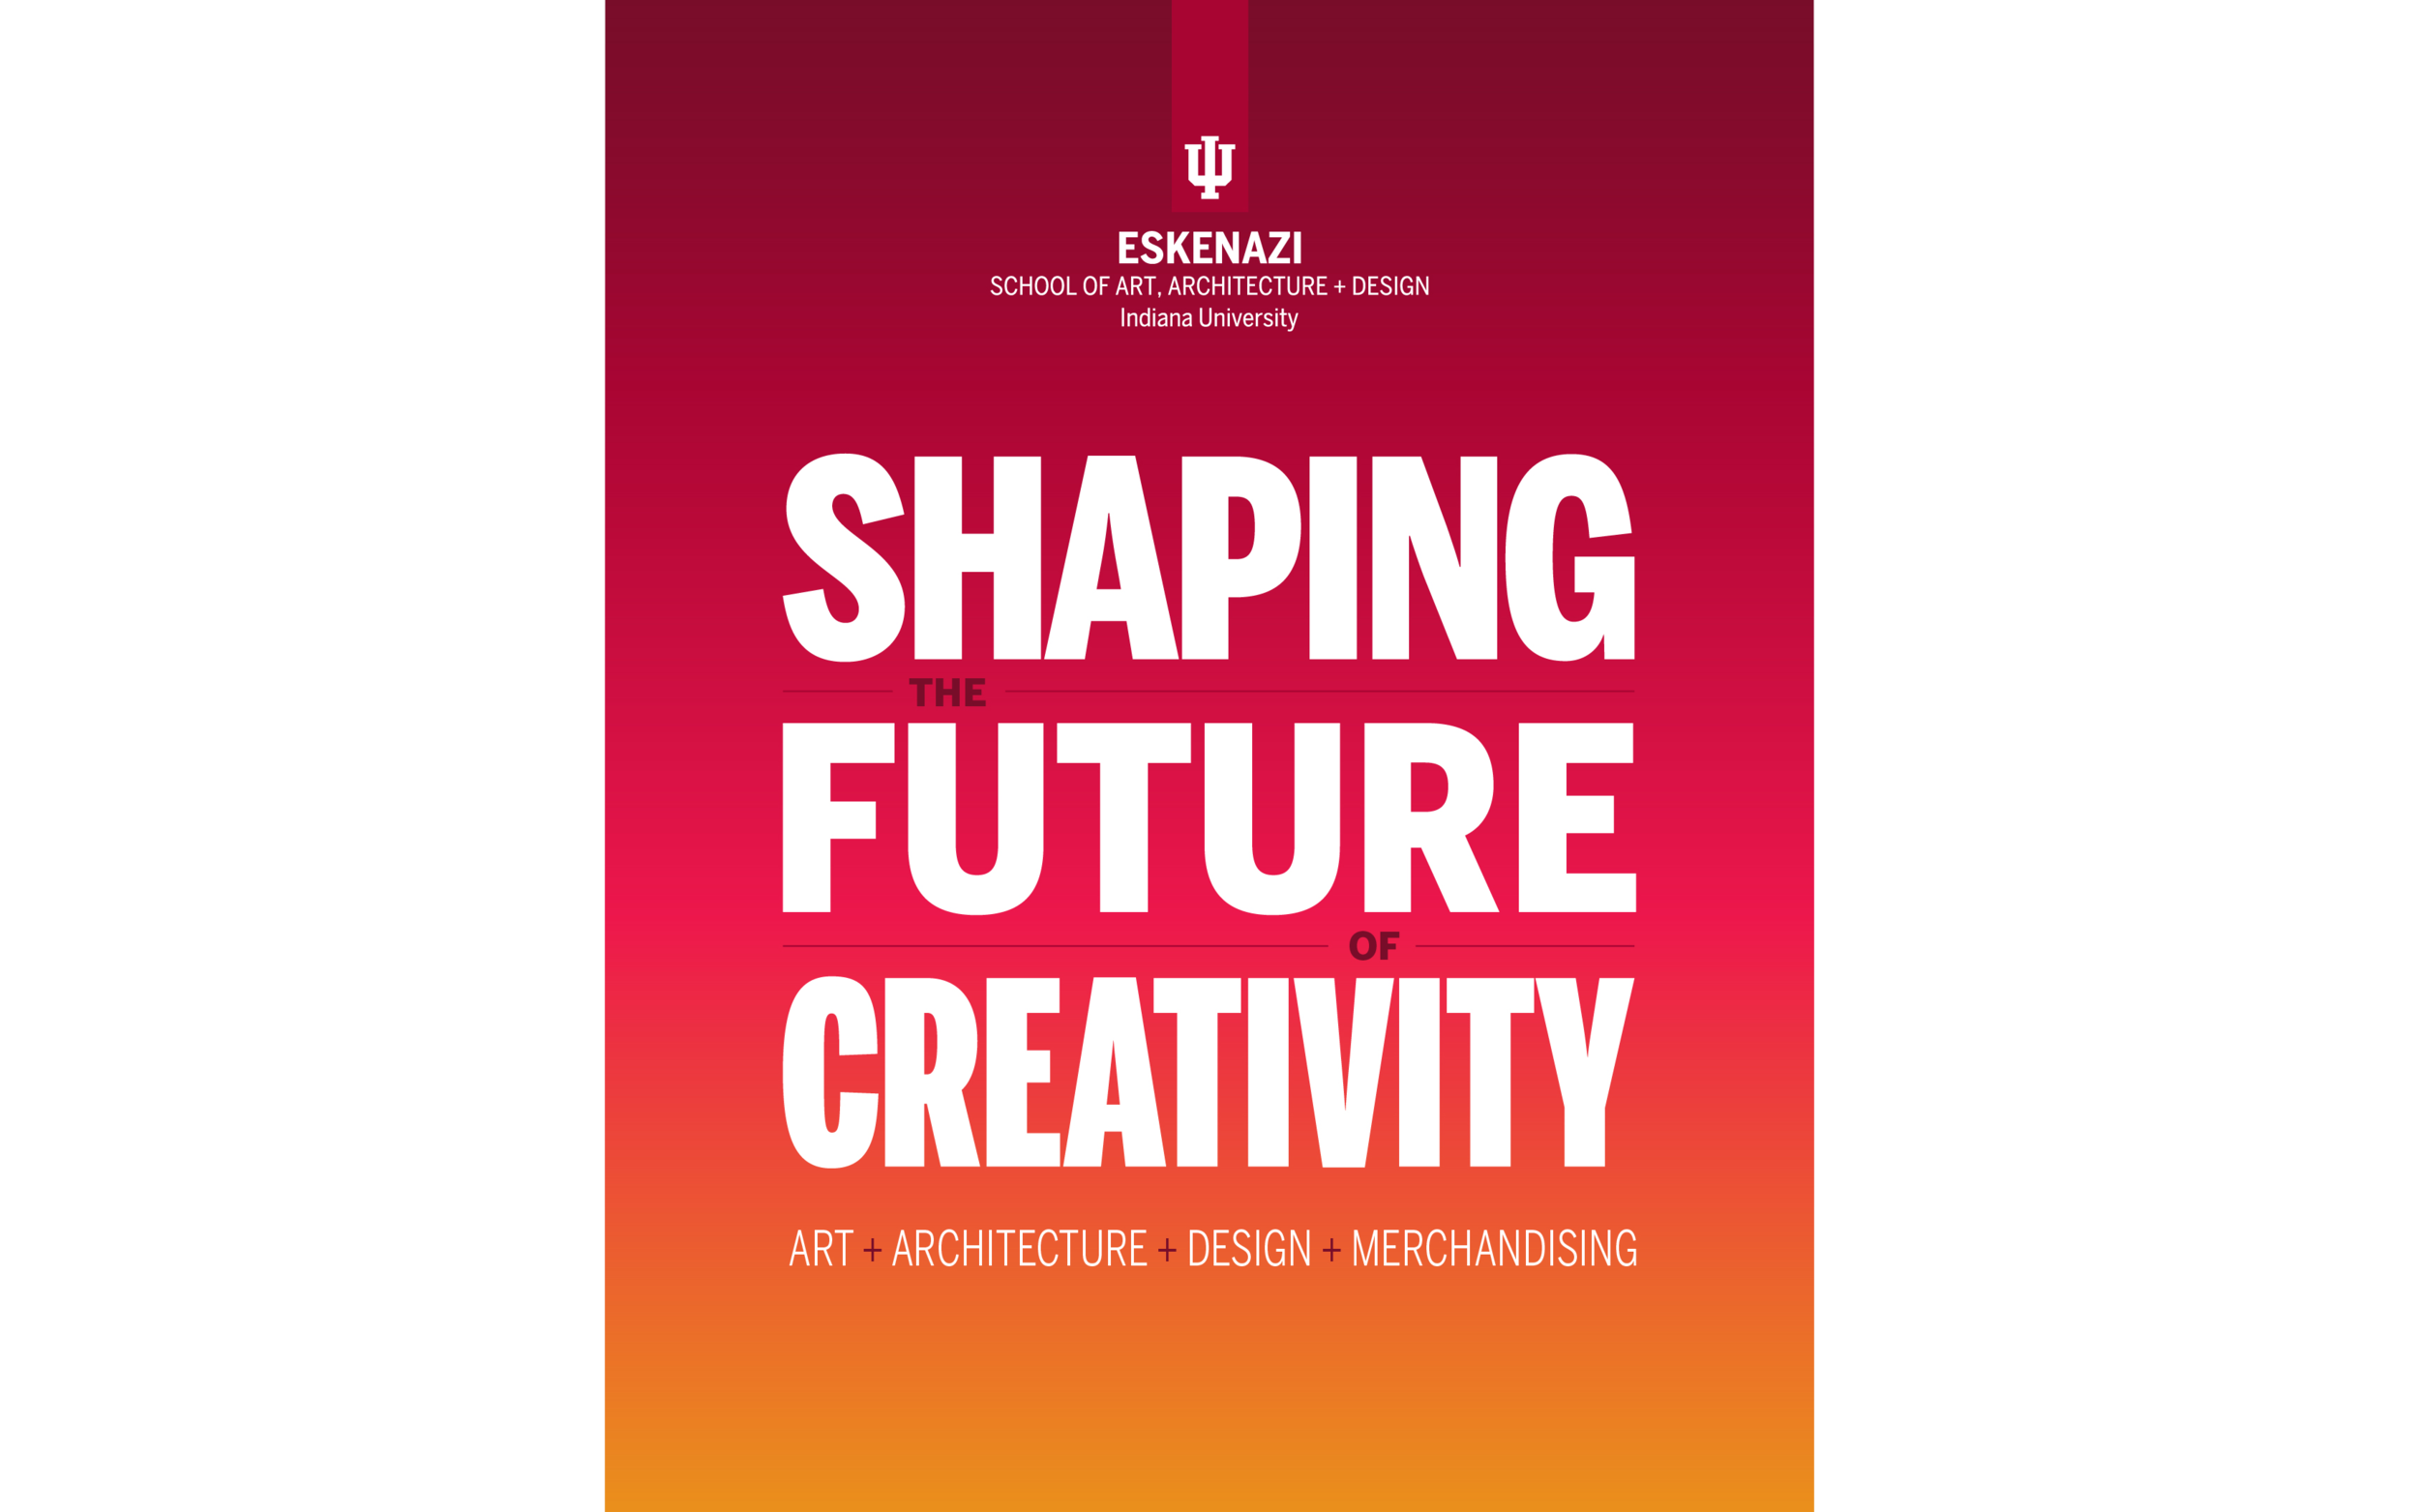  Image of cover of 2019-20 Eskenazi School viewbook featuring the phrase “Shaping the future of creativity” 